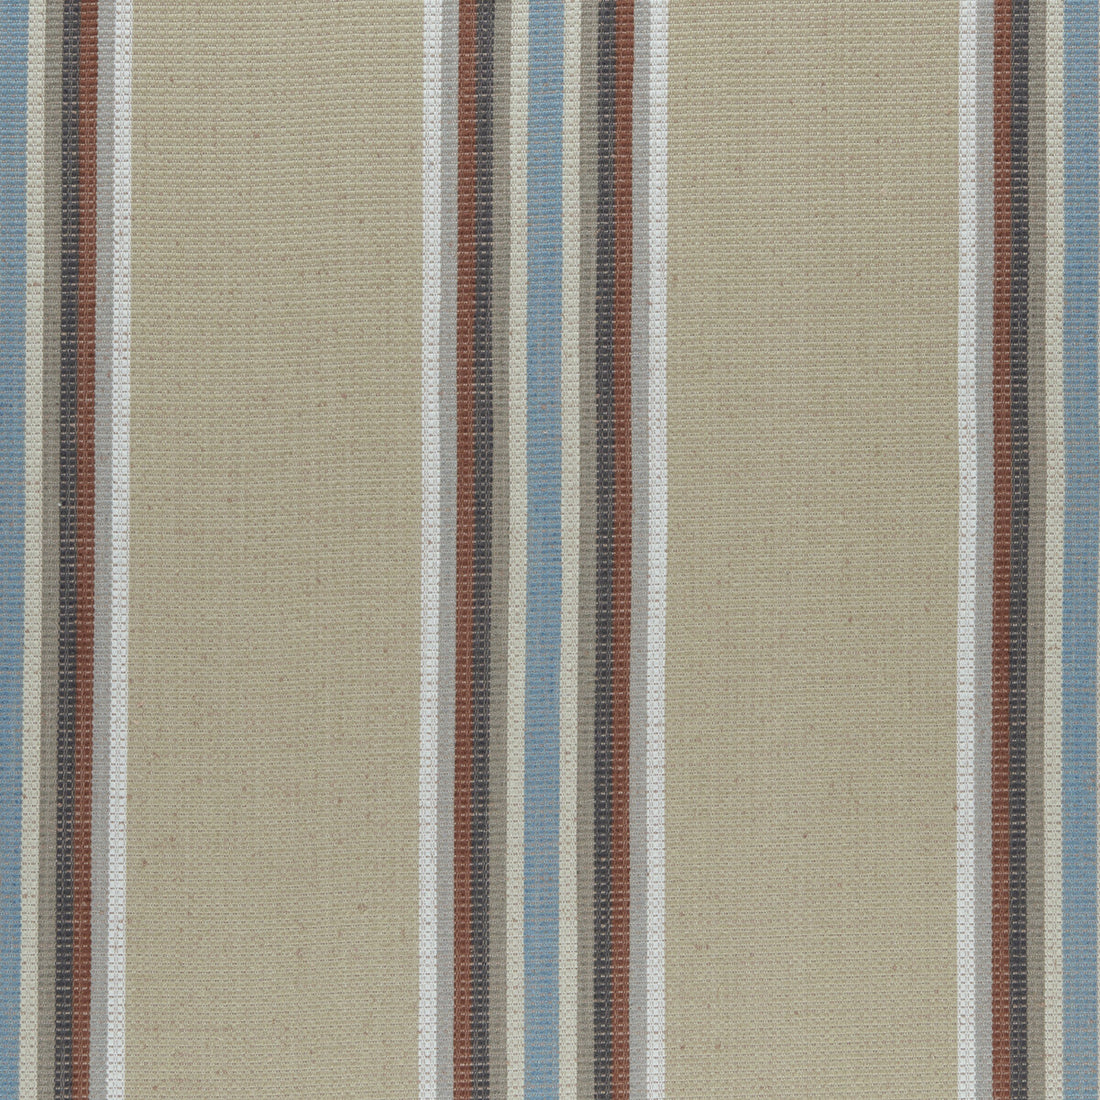 Imani fabric in cinnabar/aqua color - pattern F0955/02.CAC.0 - by Clarke And Clarke in the Clarke &amp; Clarke Amara collection